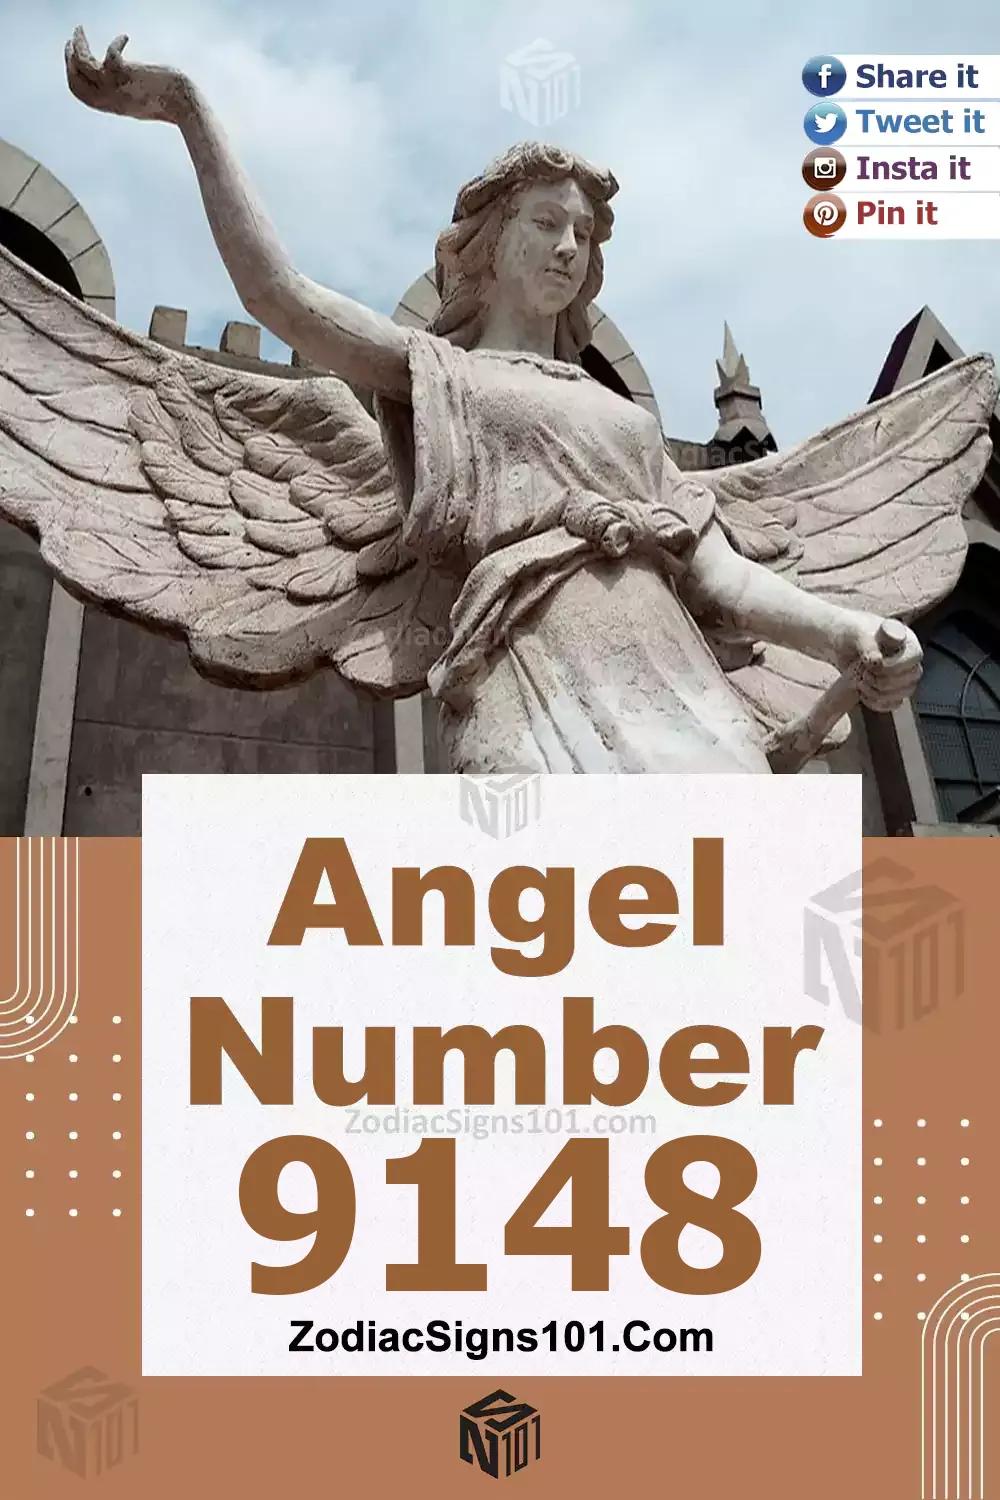 9148 Angel Number Meaning